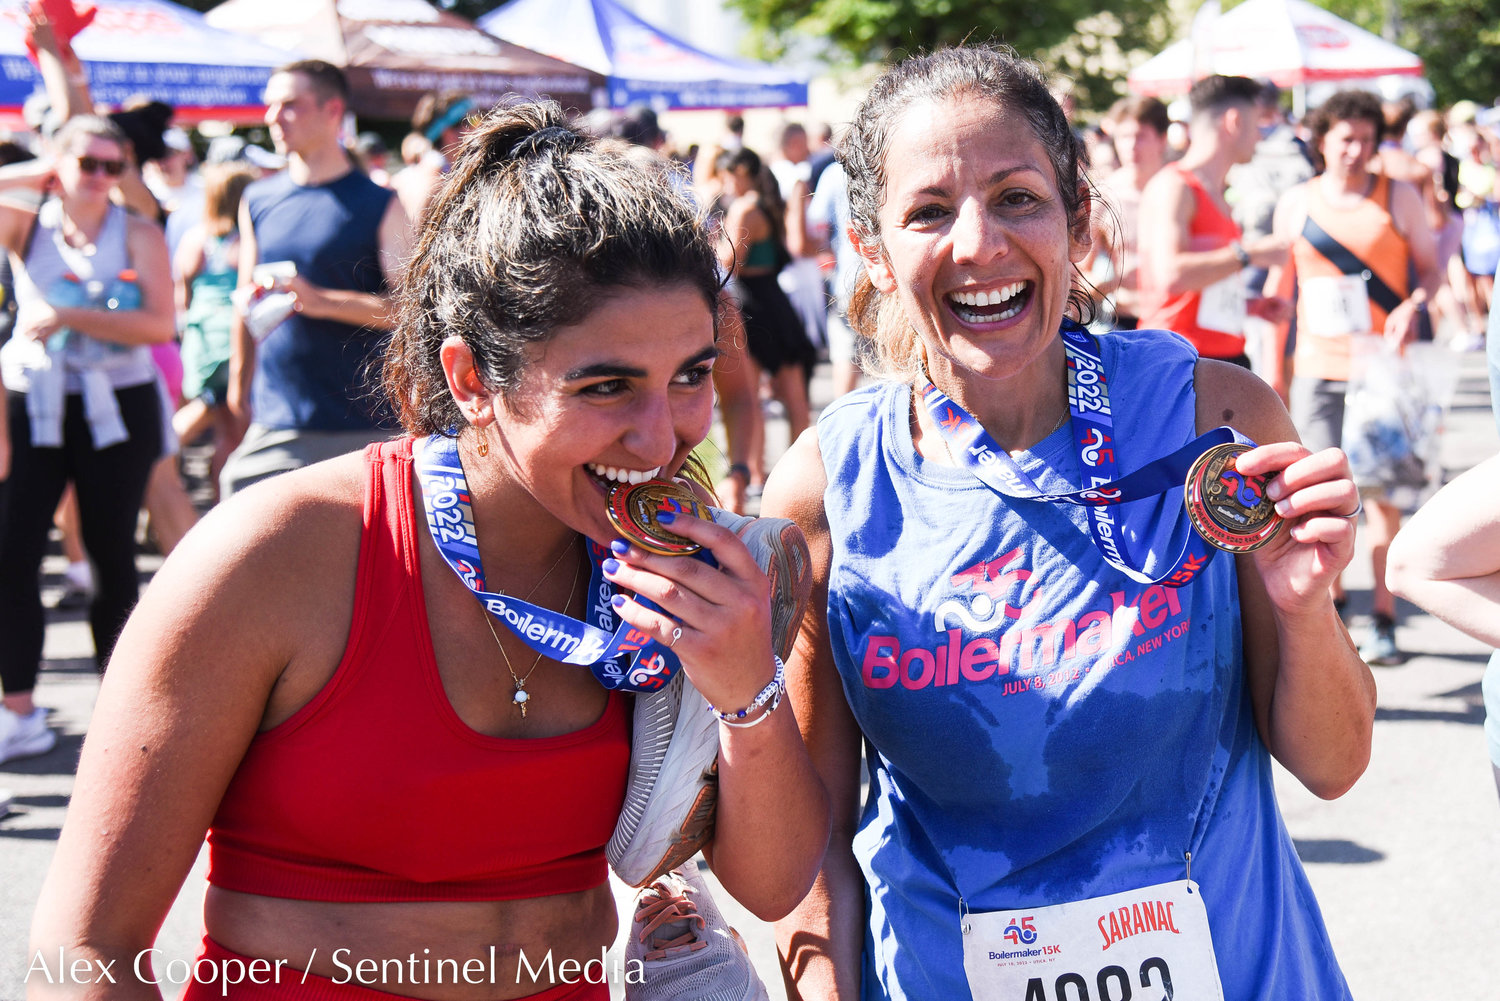 Runners enjoy the Saranac Post Race Party following the 45th Boilermaker Road Race.